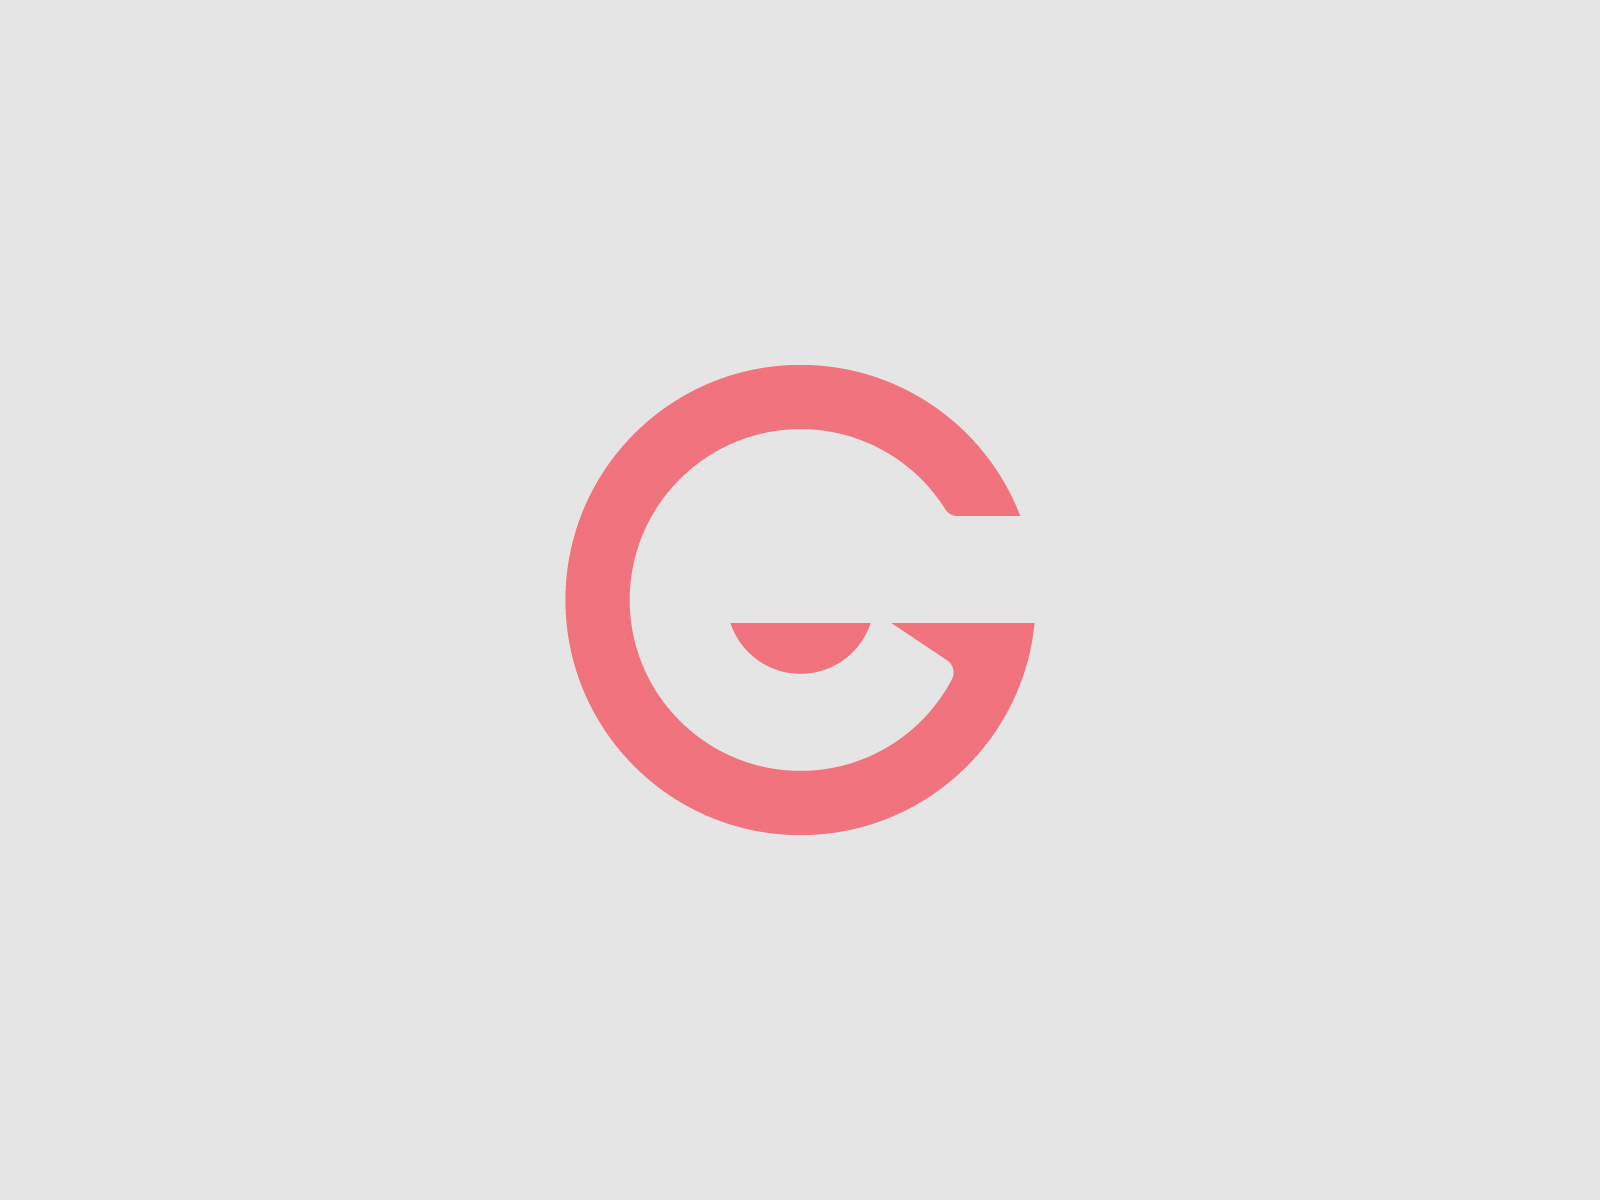 G Letter Iconic logo by Kornel Hawee on Dribbble